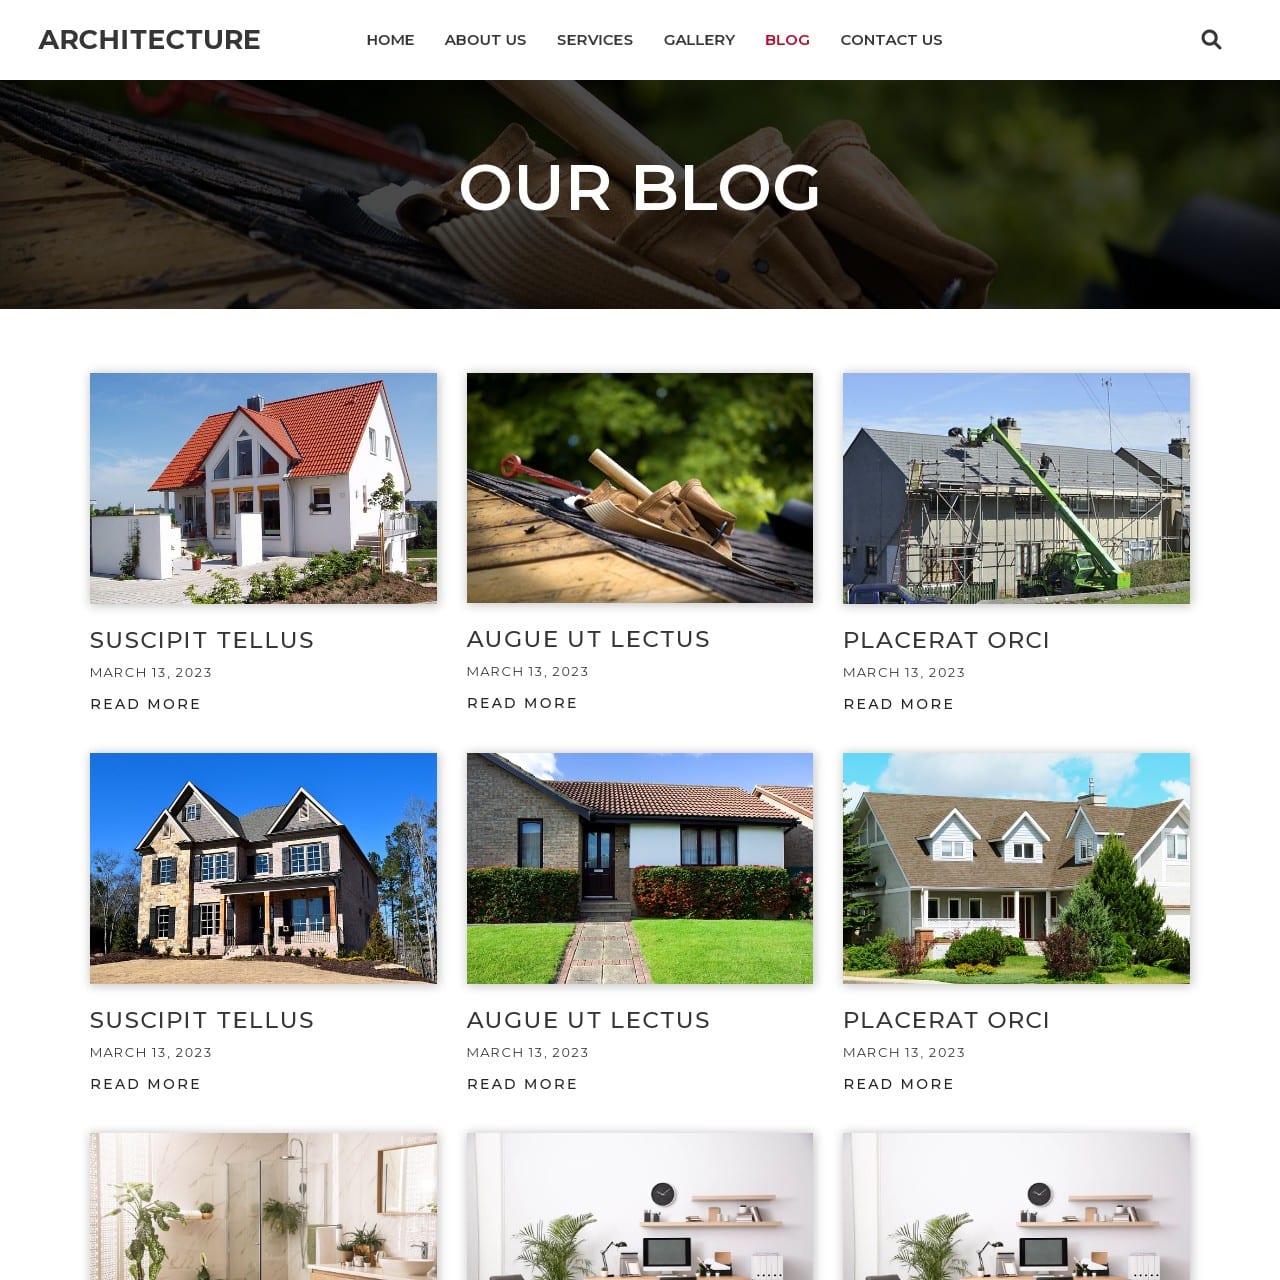 Architecture Template - Blog Page